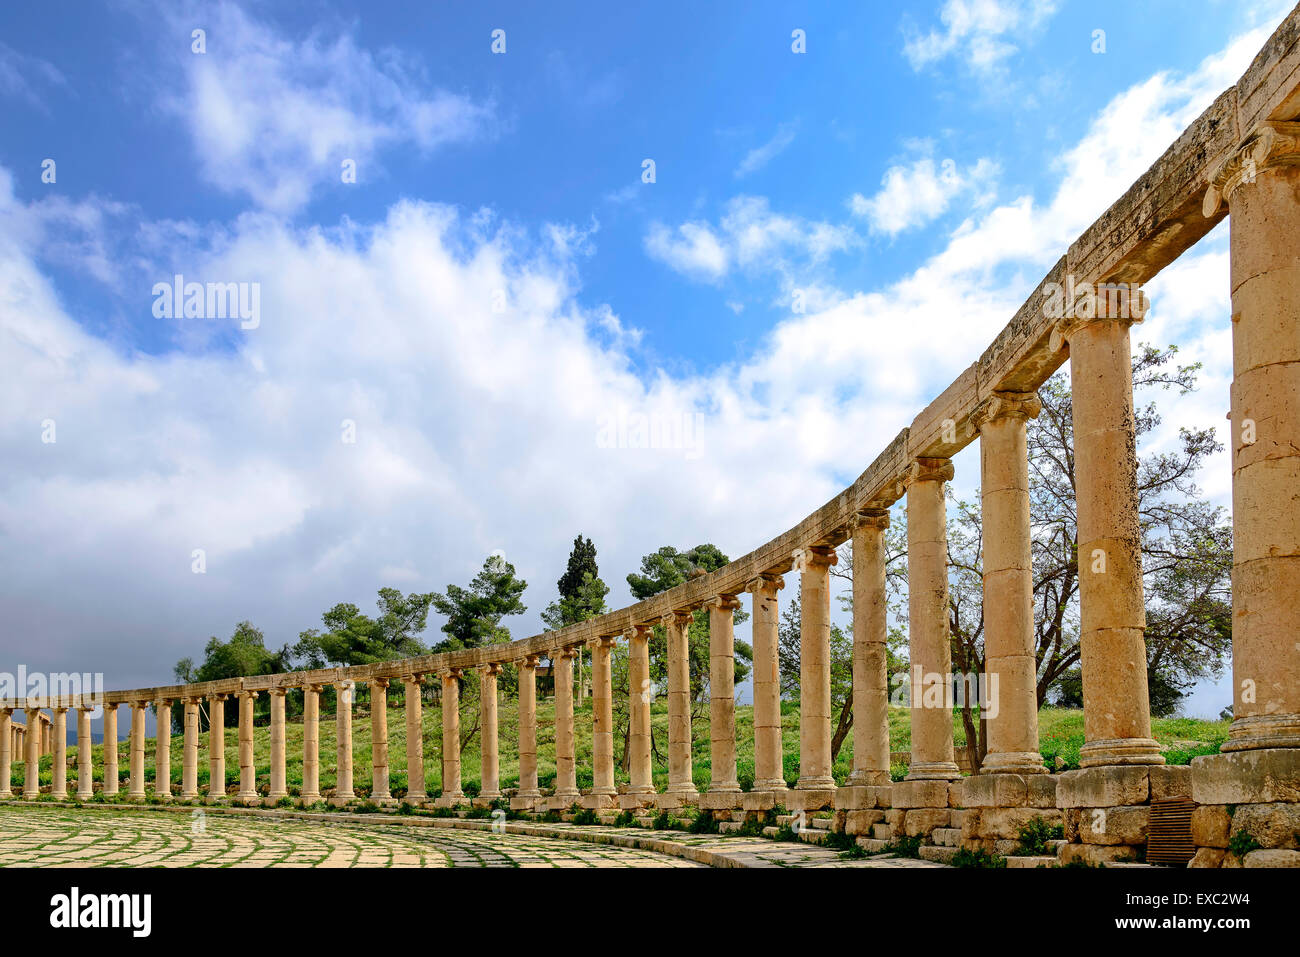 View of the Oval Forum colonnade in ancient Jerash, Jordan - Jerash is the site of the ruins of the Greco-Roman city of Gerasa. Stock Photo